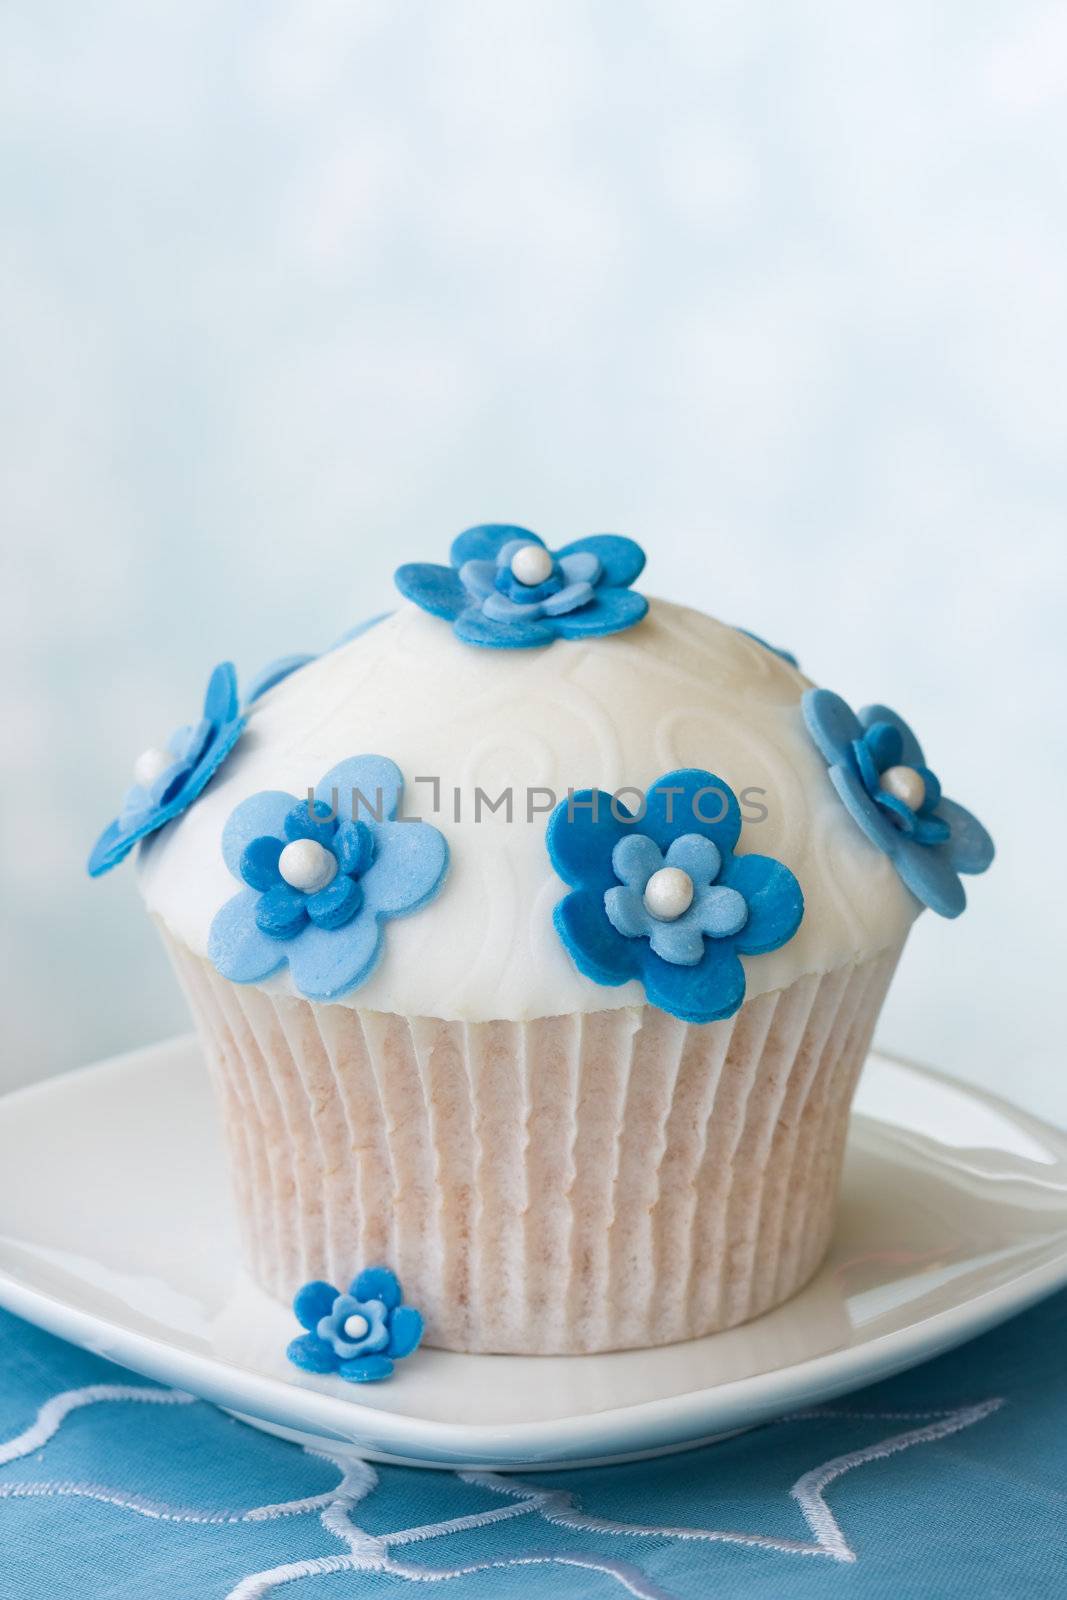 Cupcake decorated with blue fondant flowers